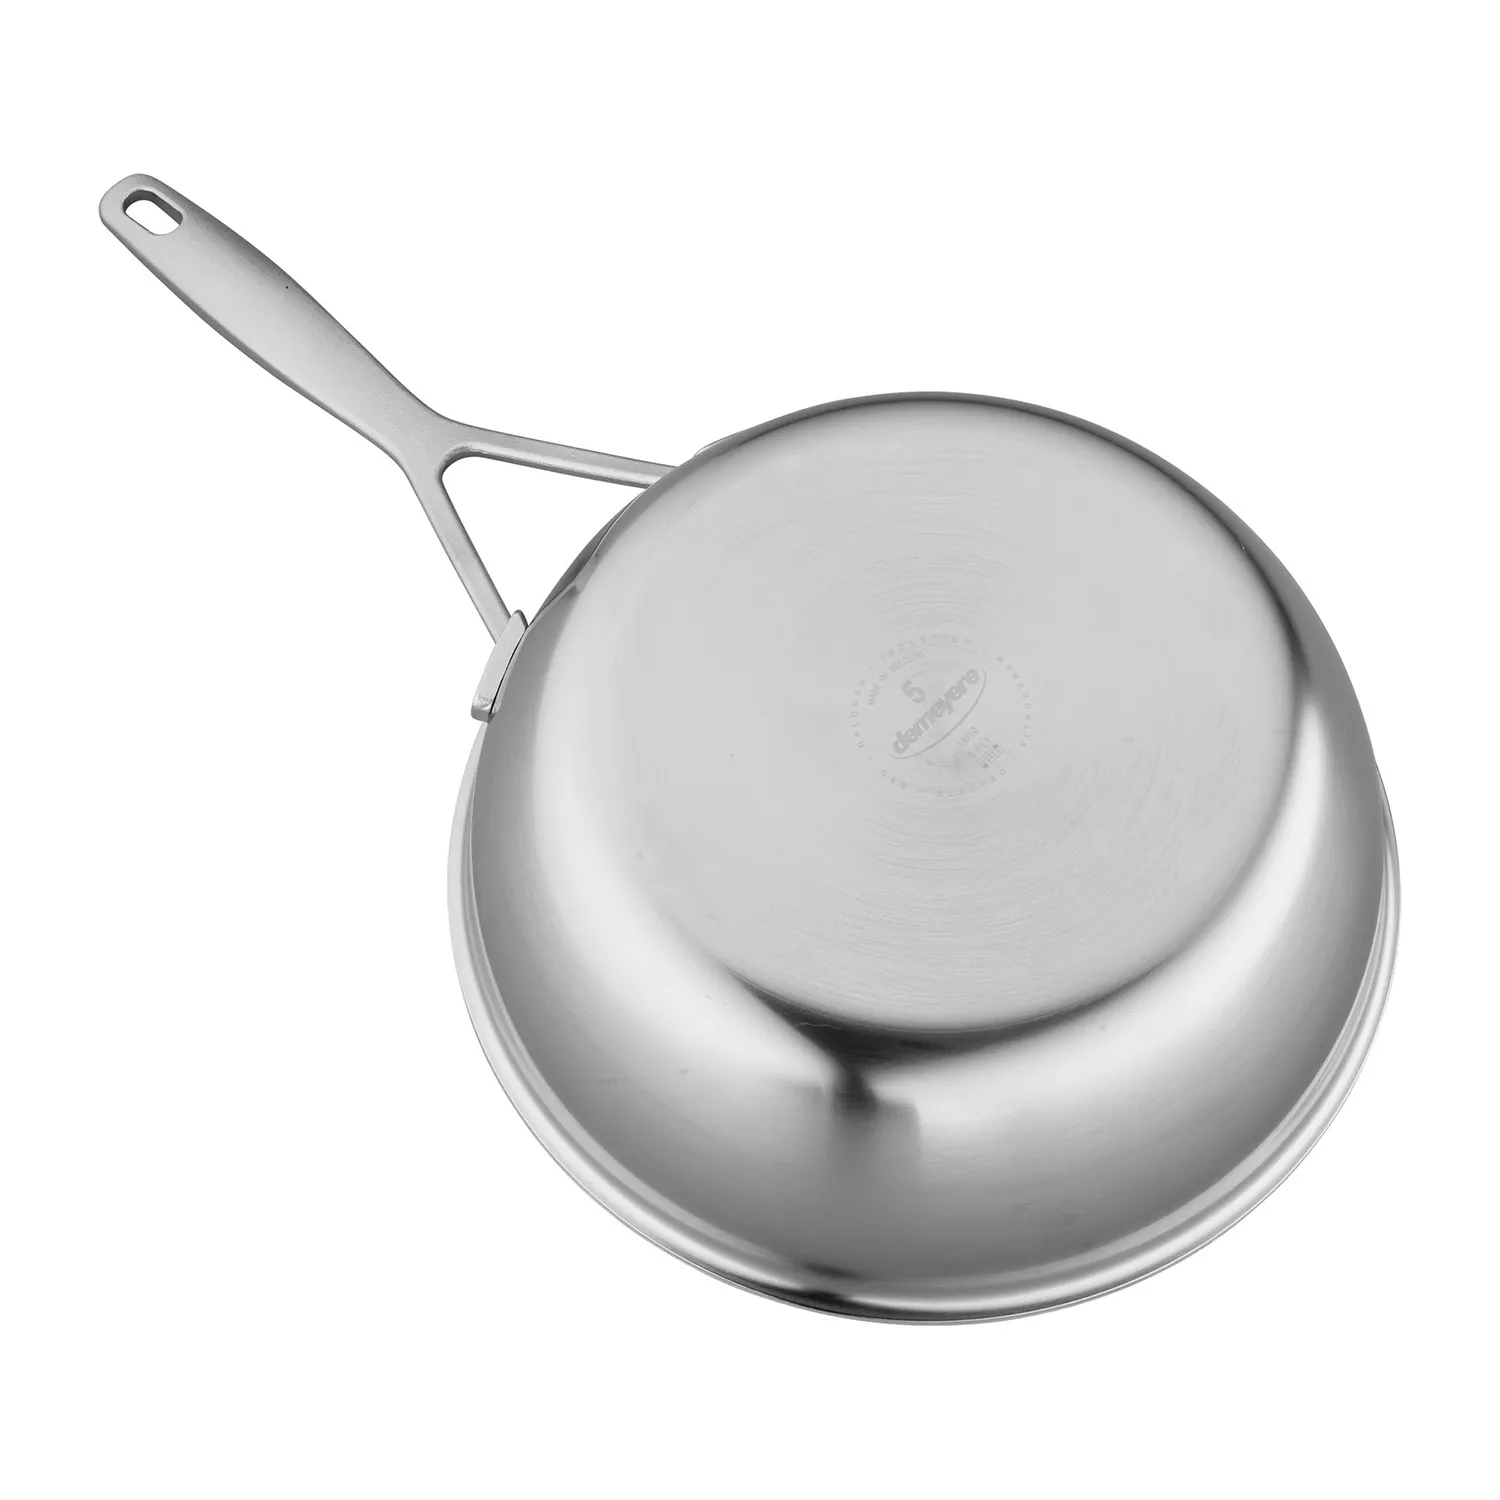 Demeyere Industry5 Essential Pan with Thermo Lid, 3.5 qt.